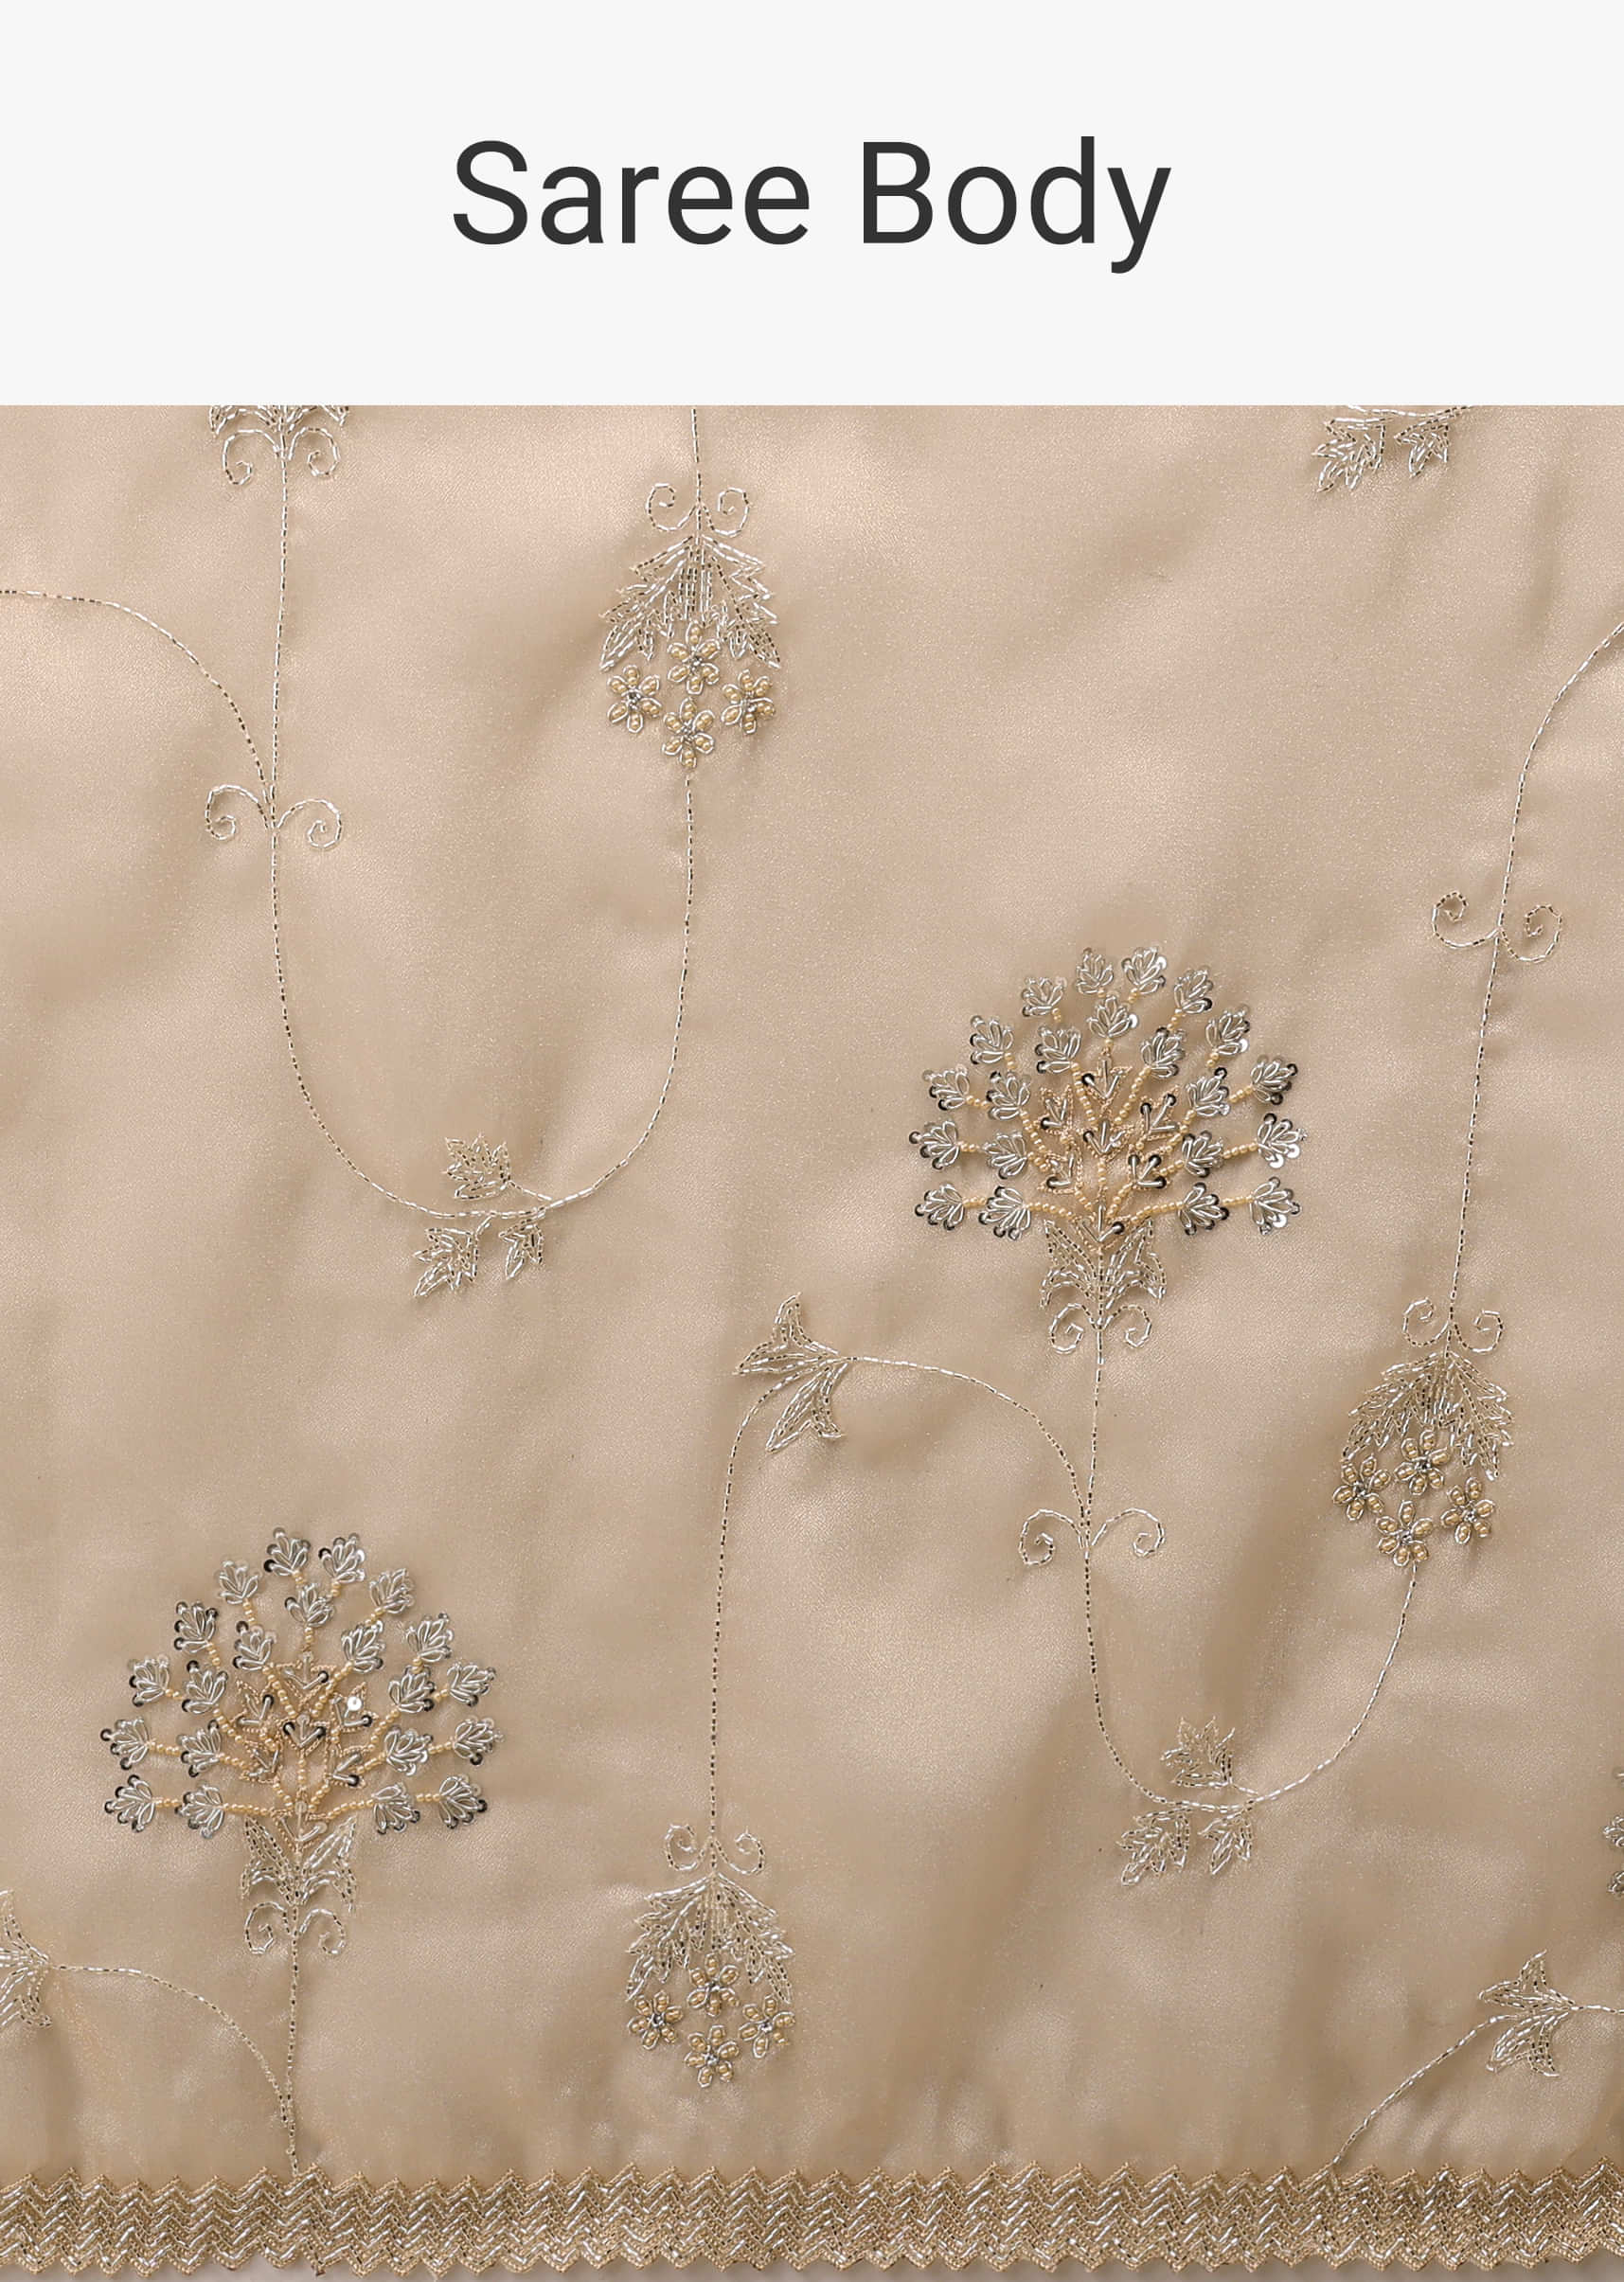 Frosted Almond Tissue Saree In Zardozi Embroidery Buttis, Leafy Motifs Embroidery Detailing On Border 